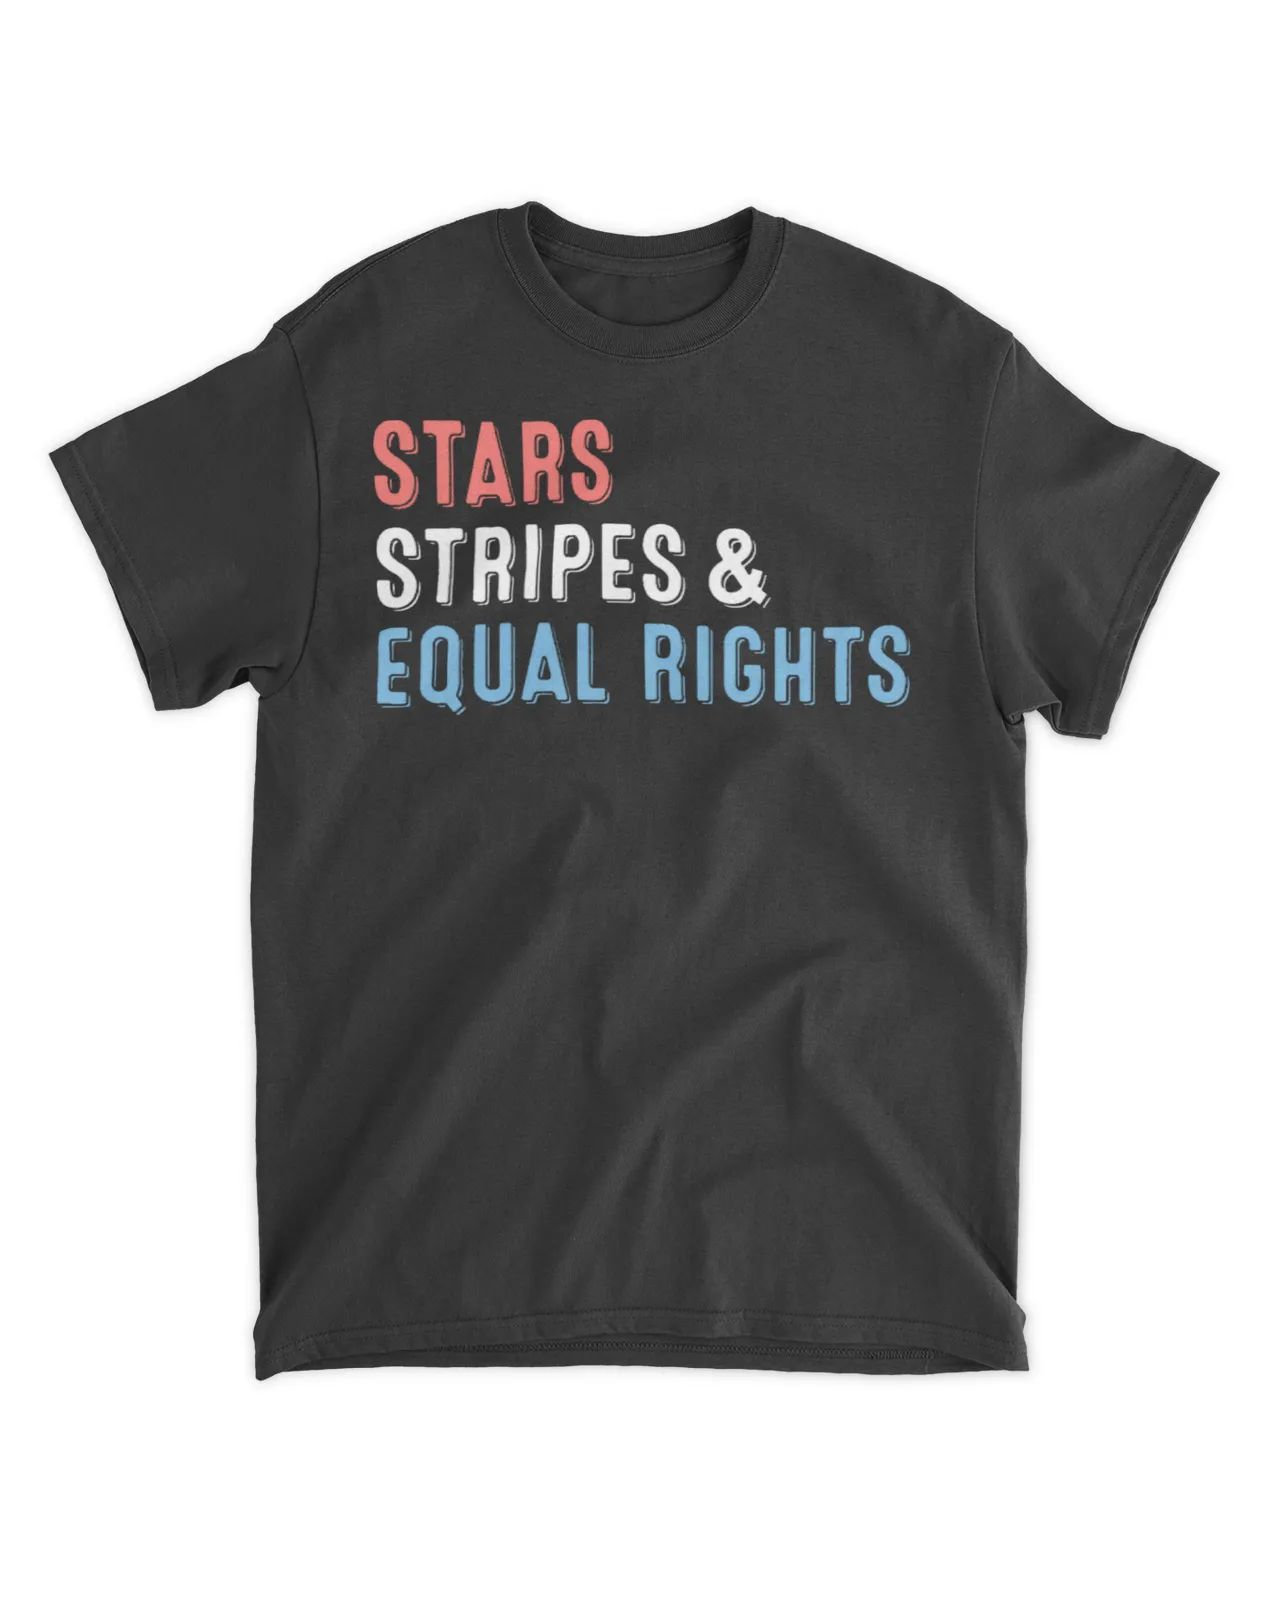  Stars stripes and equal rights shirt